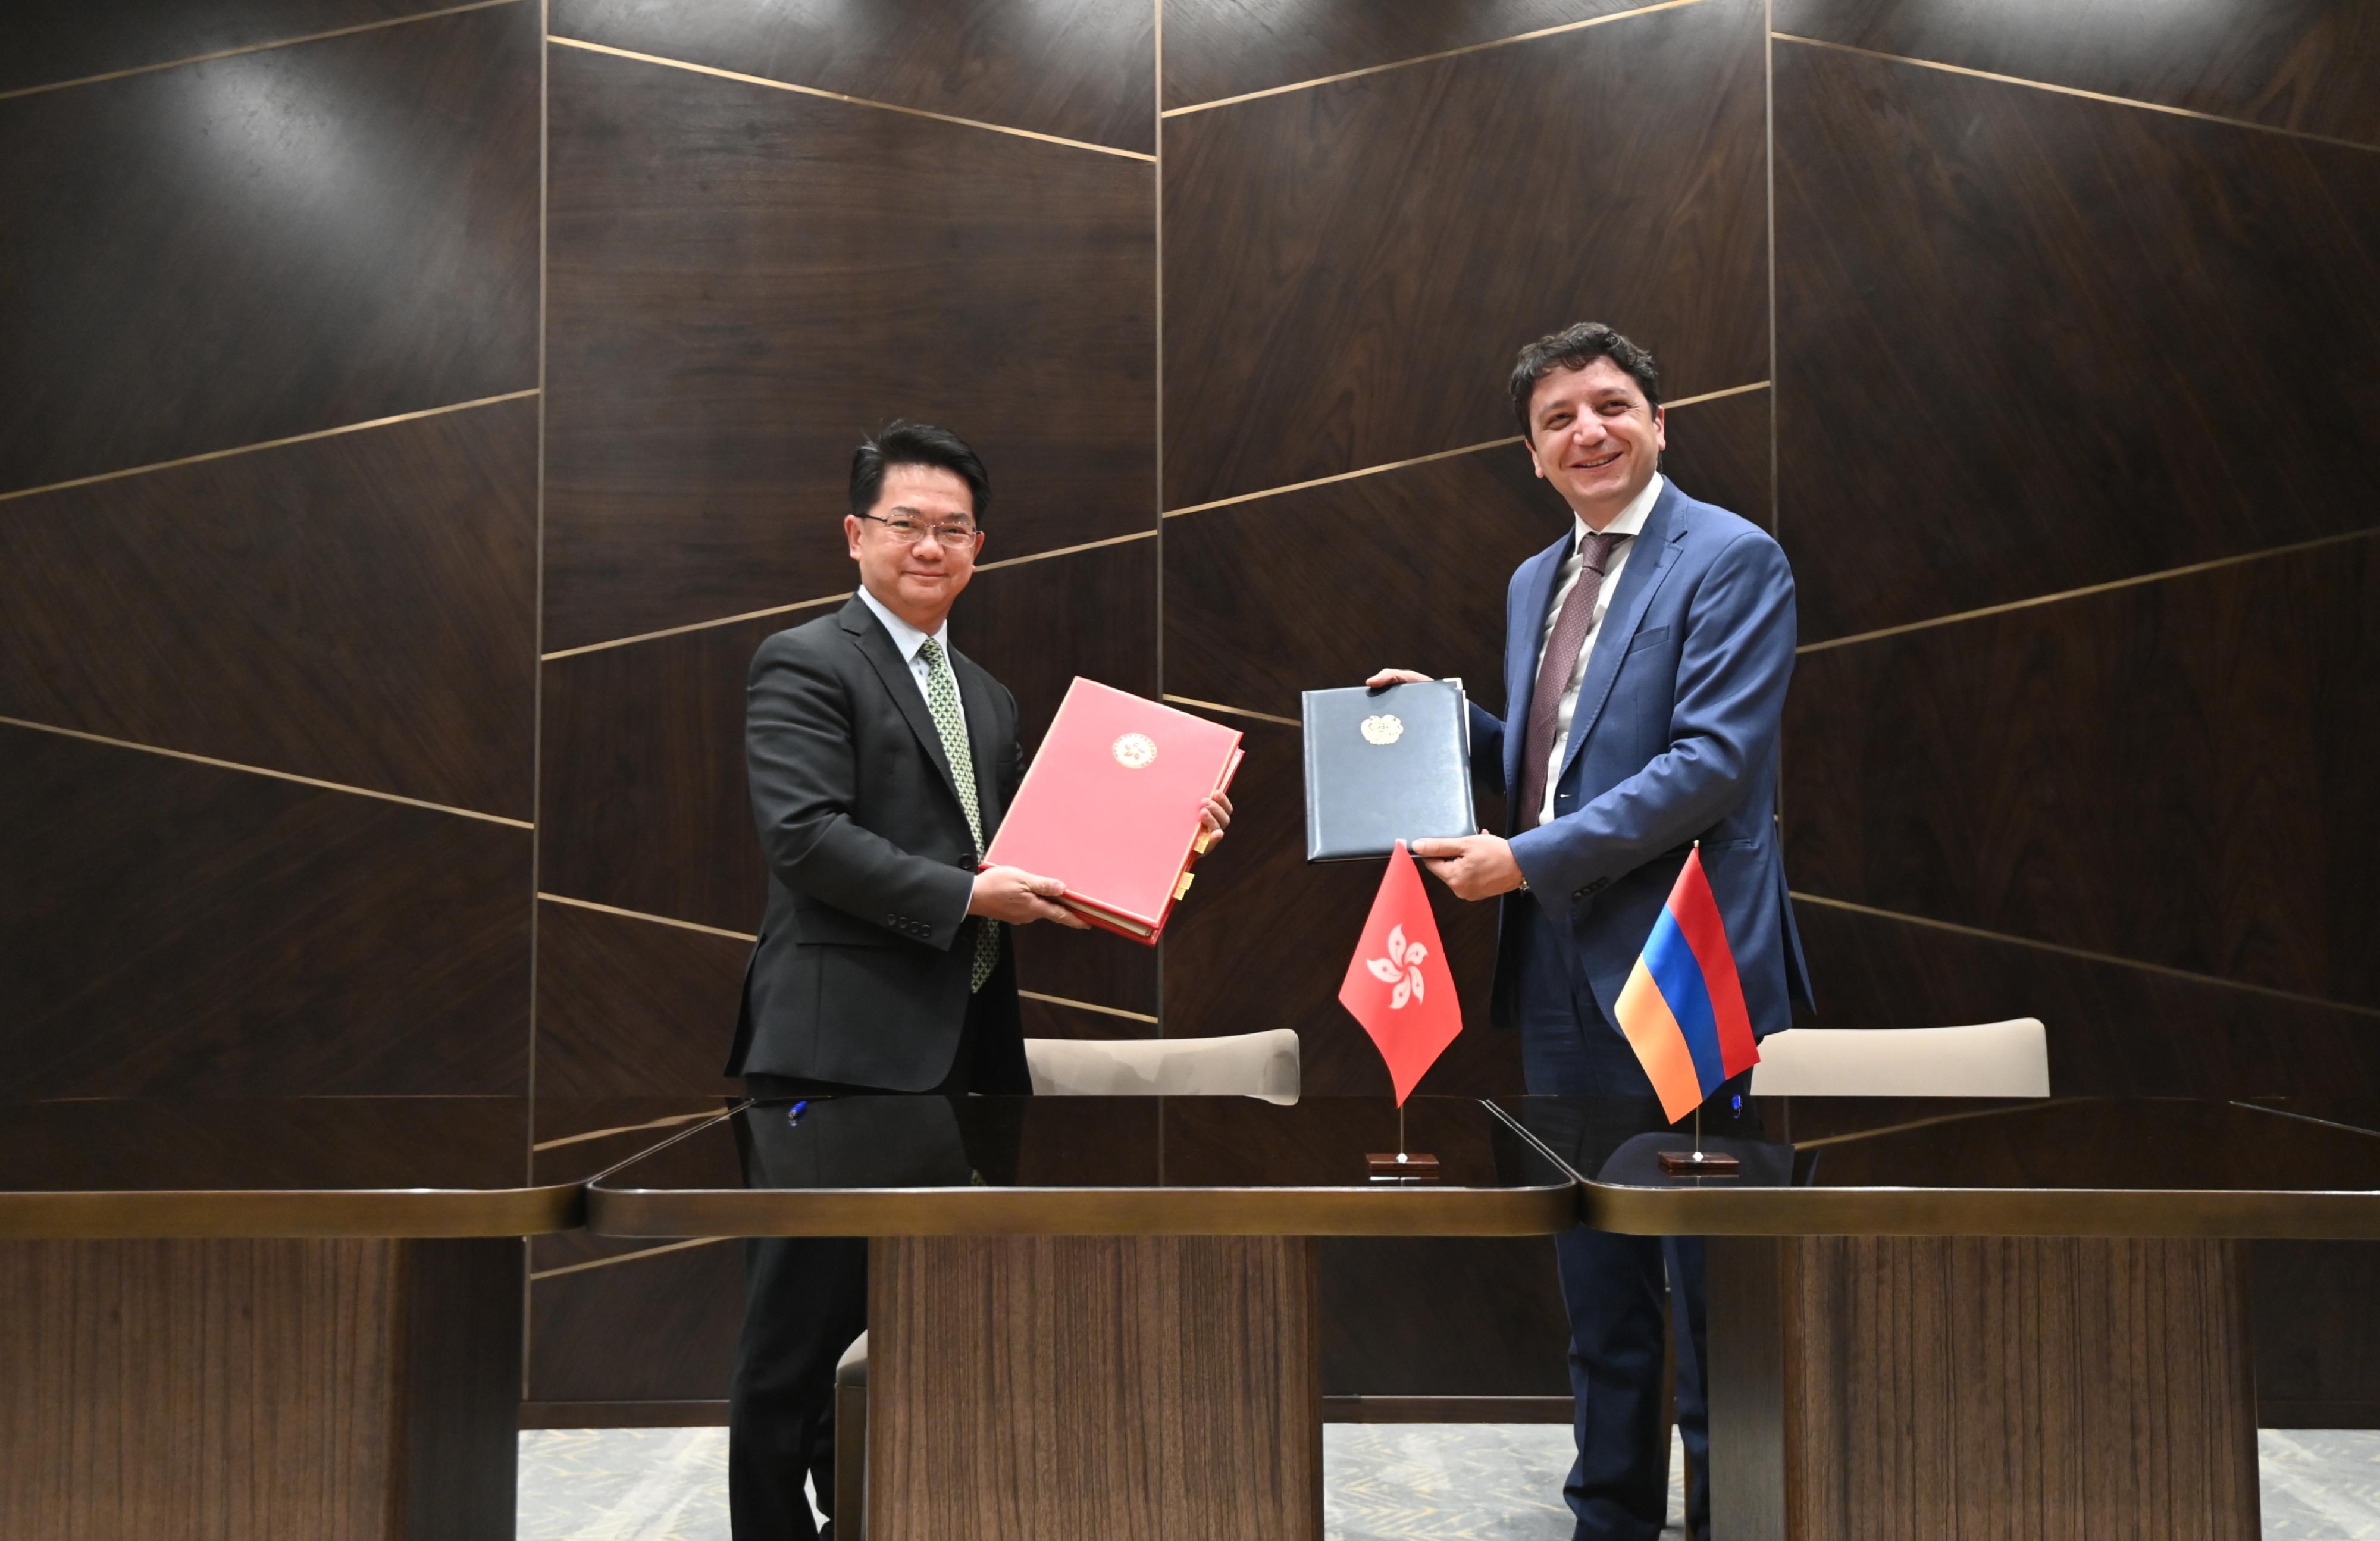 The Commissioner of Inland Revenue, Mr Tam Tai-pang (left), exchanges documents with the Minister of Finance of Armenia, Mr Vahe Hovhannisyan (right), after signing a comprehensive avoidance of double taxation agreement today (June 24, Yerevan time).